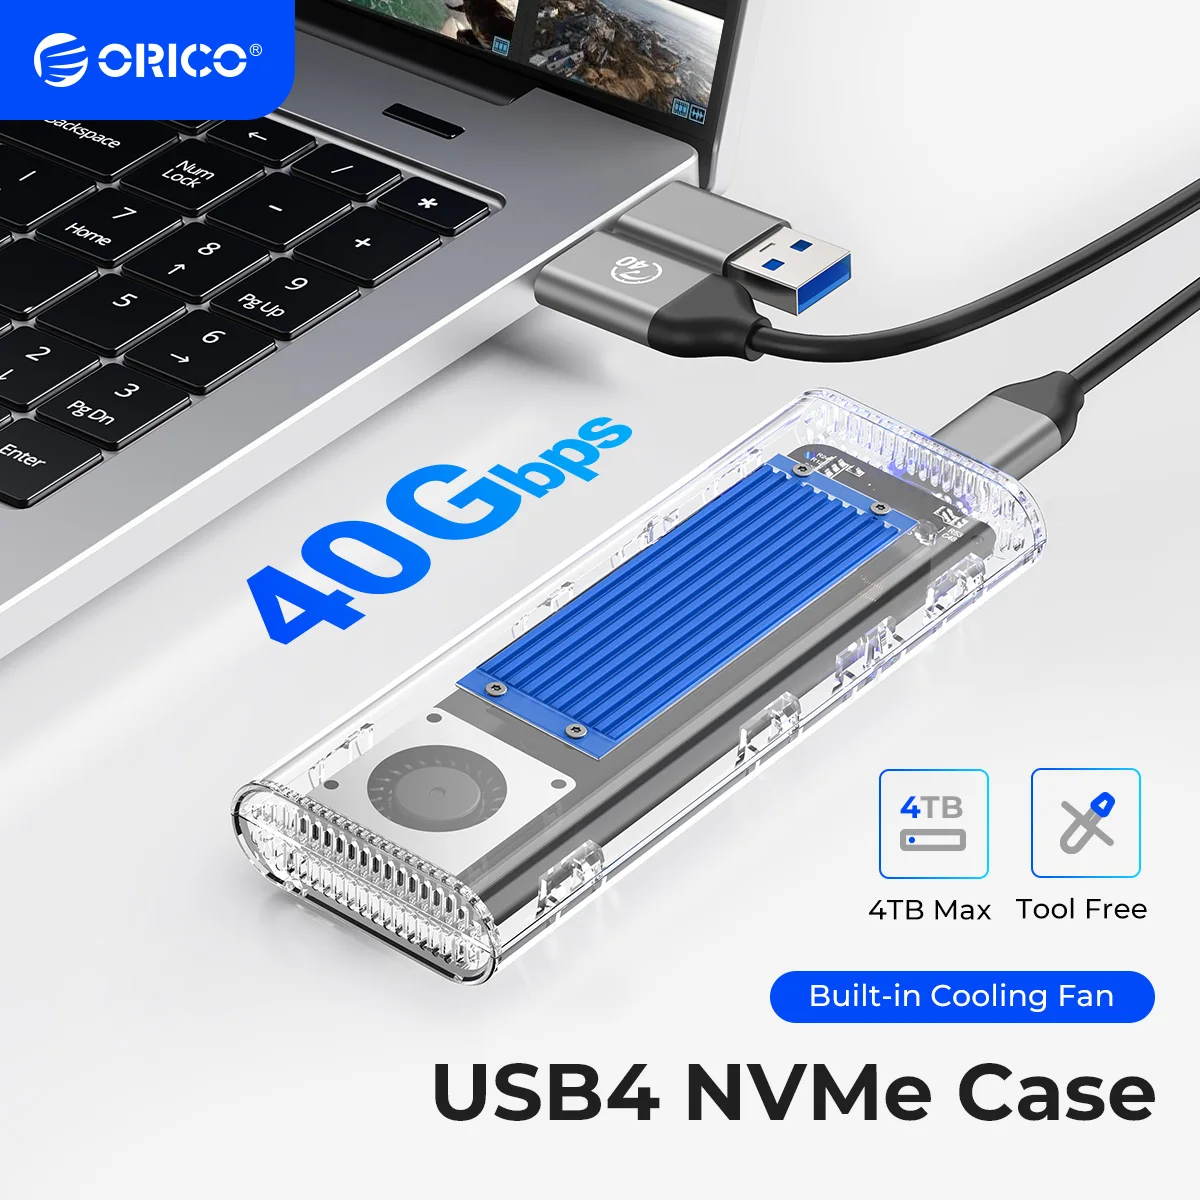 

ORICO USB4 M.2 SSD Case 40Gbps with Cooling Fan Compatible with Thunderbolt 3 4 USB3.2 M2 NVMe Case Enclosure for MacBook Pro